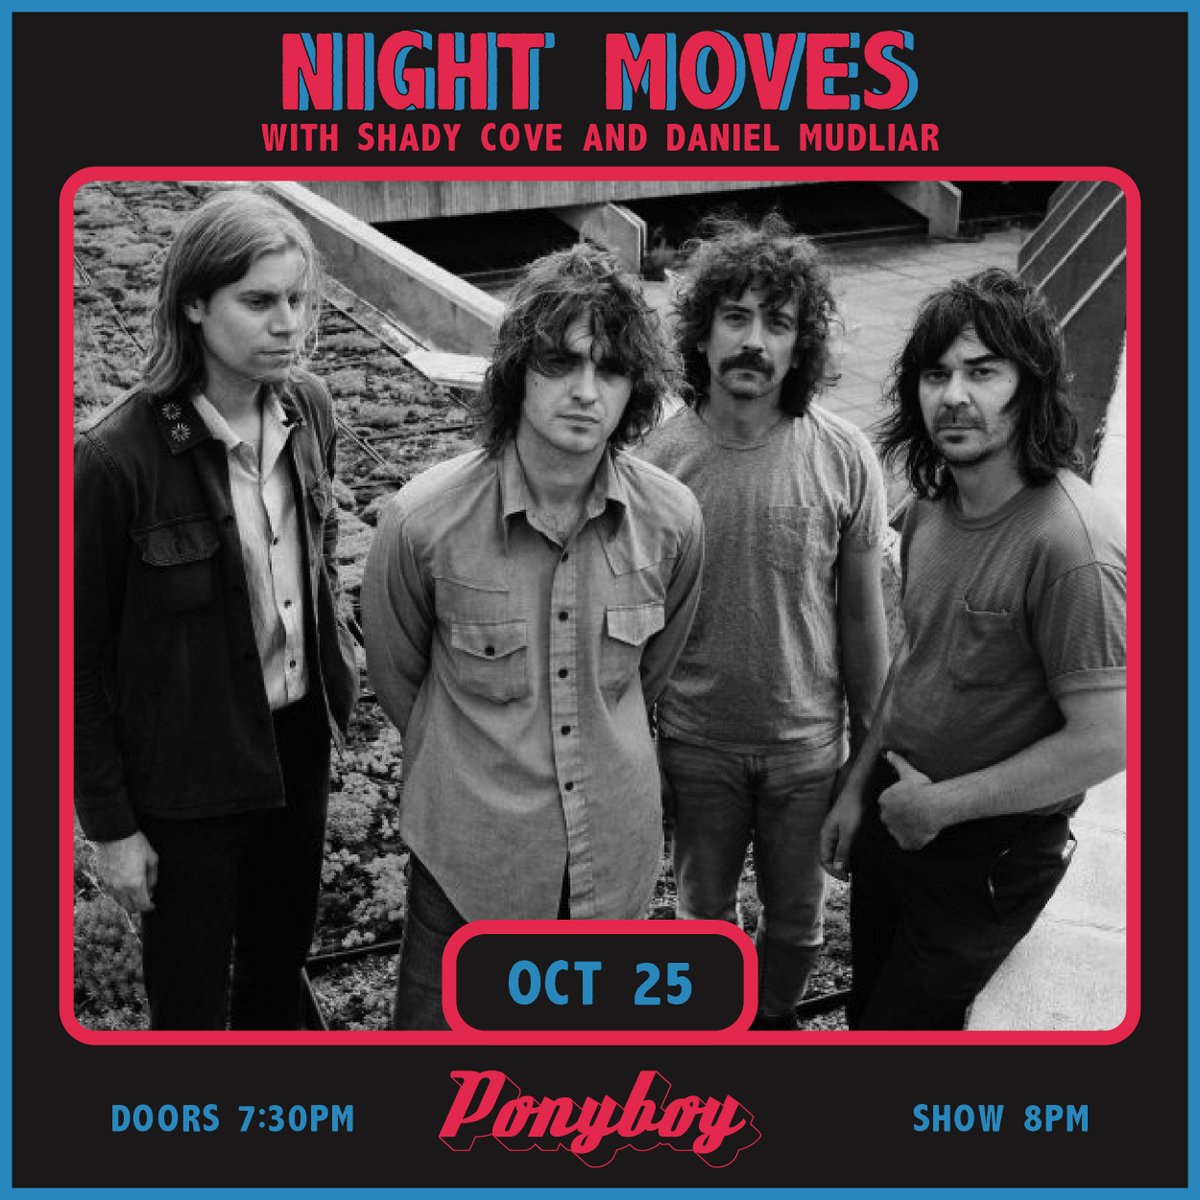 LOCAL SUPPORT ADDED 🖤⚡️ Oklahoma’s own @danielmudliar starts the show for cinematic and psychedelic Indie Rockers @nightmovesmpls along with multi-instrumentalists Shady Cove TOMORROW NIGHT! Don’t miss your chance to witness BRAND NEW music Tuesday! 🎟 : bit.ly/3zHDx1y